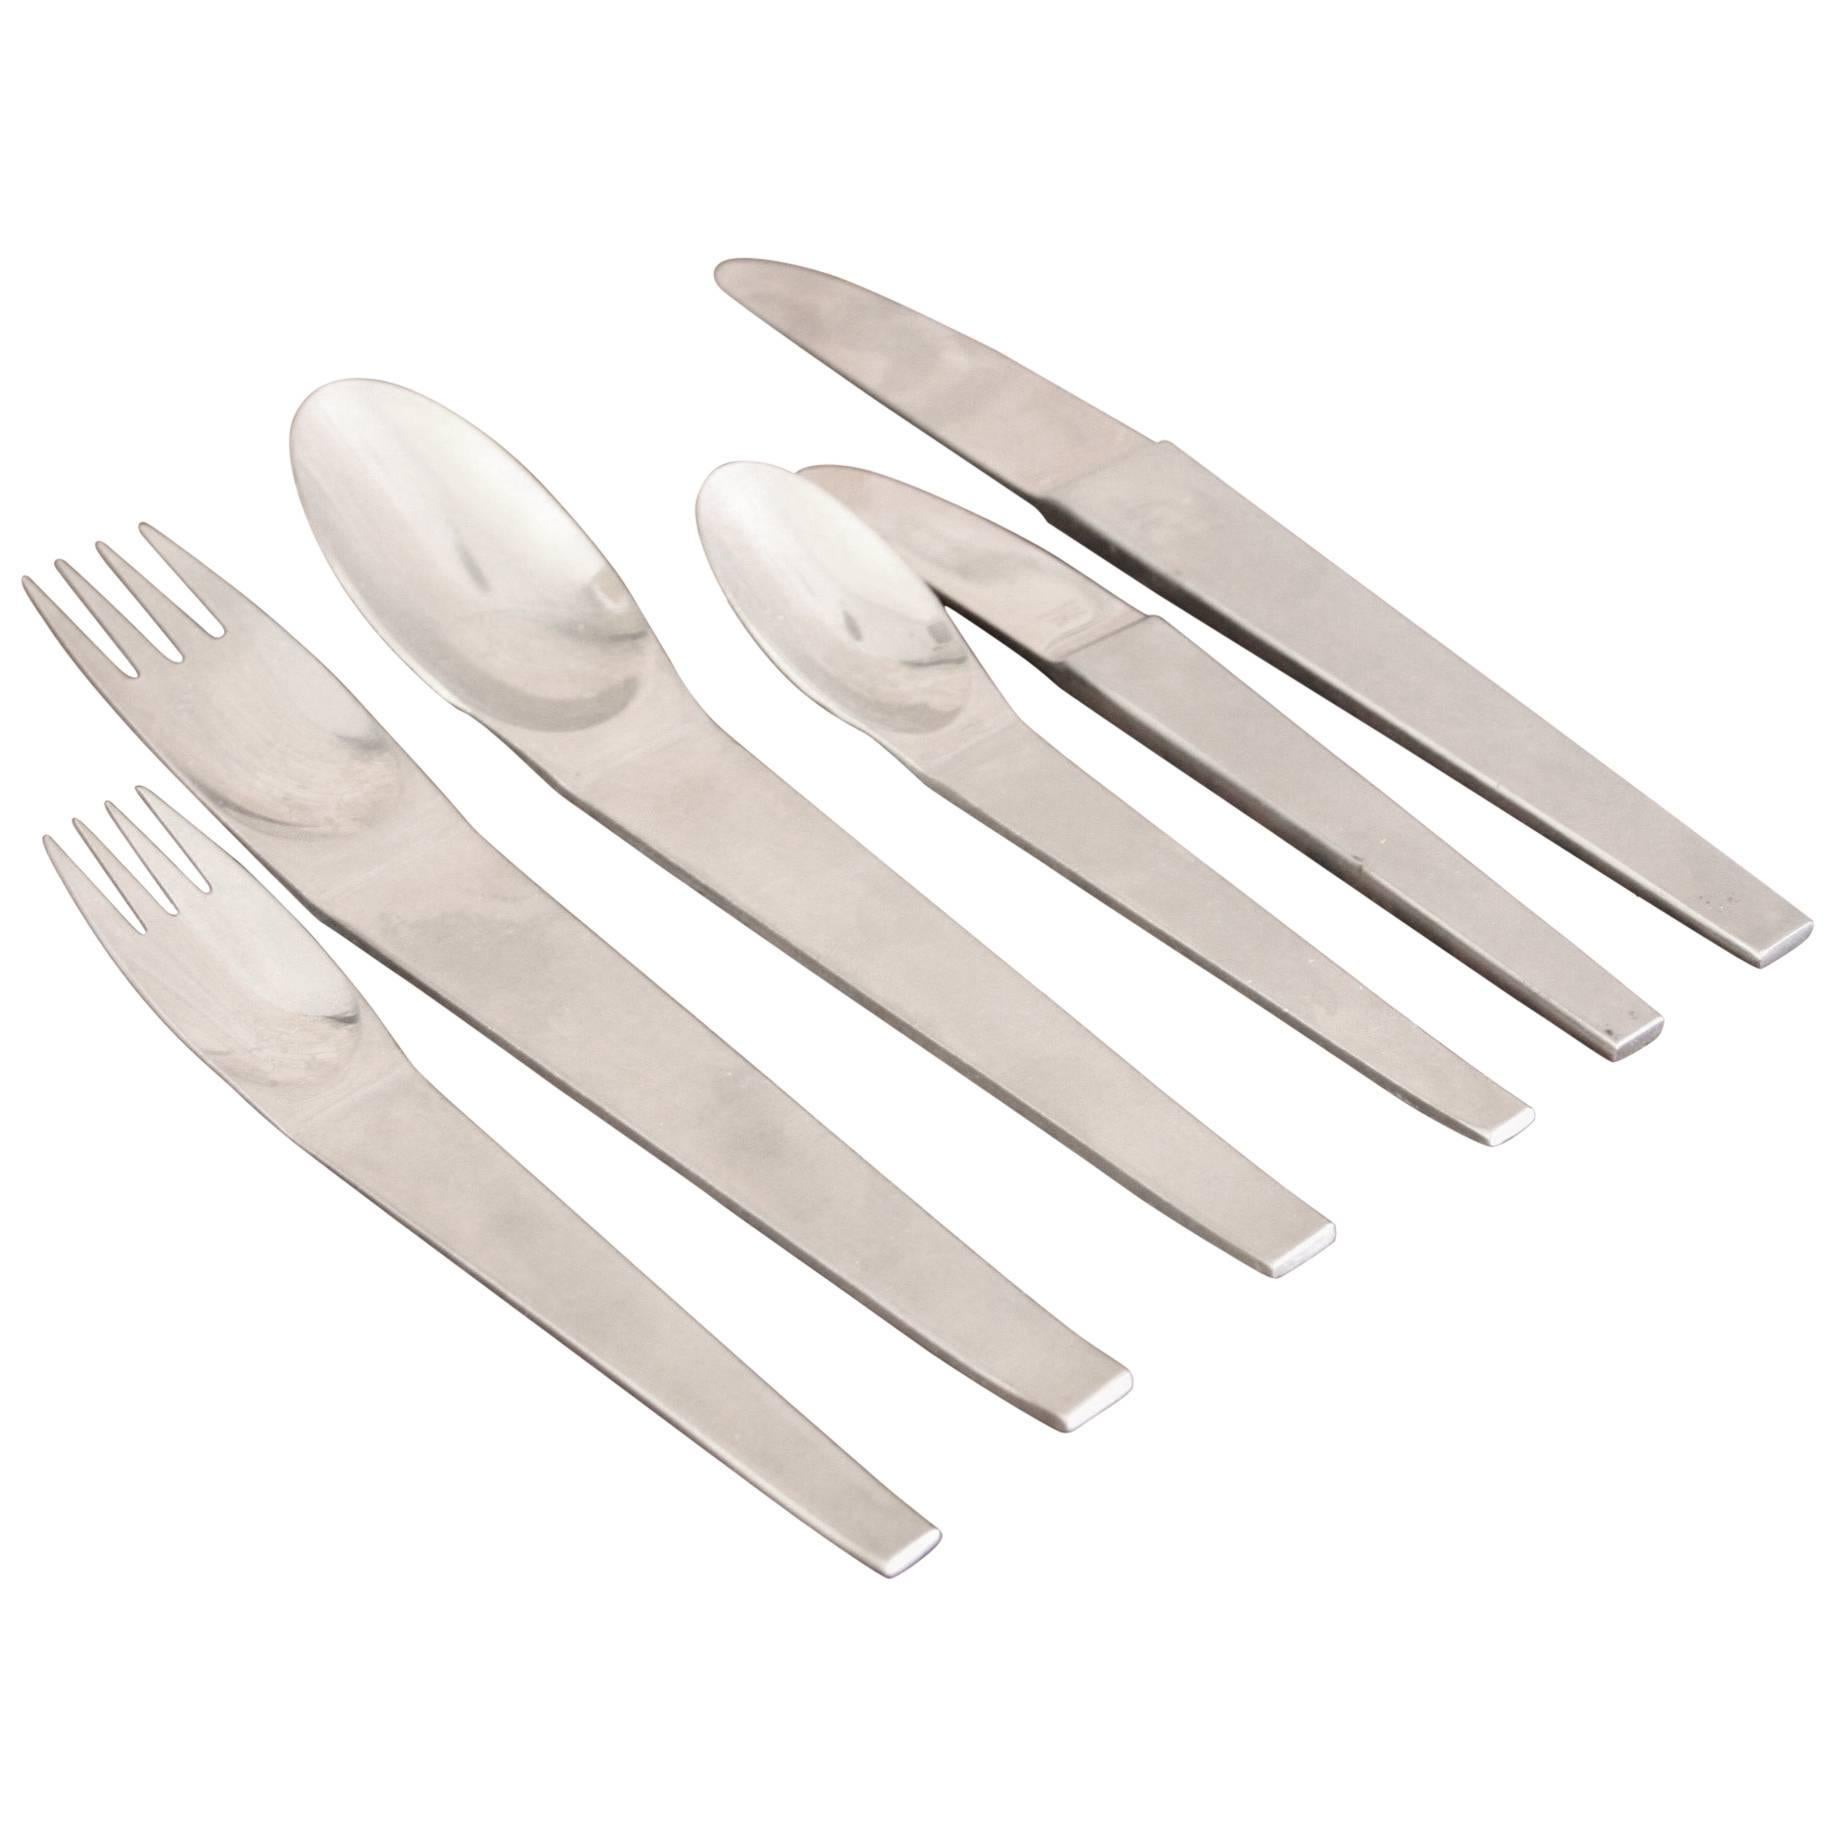 Stainless Flatware by Carl Aubock